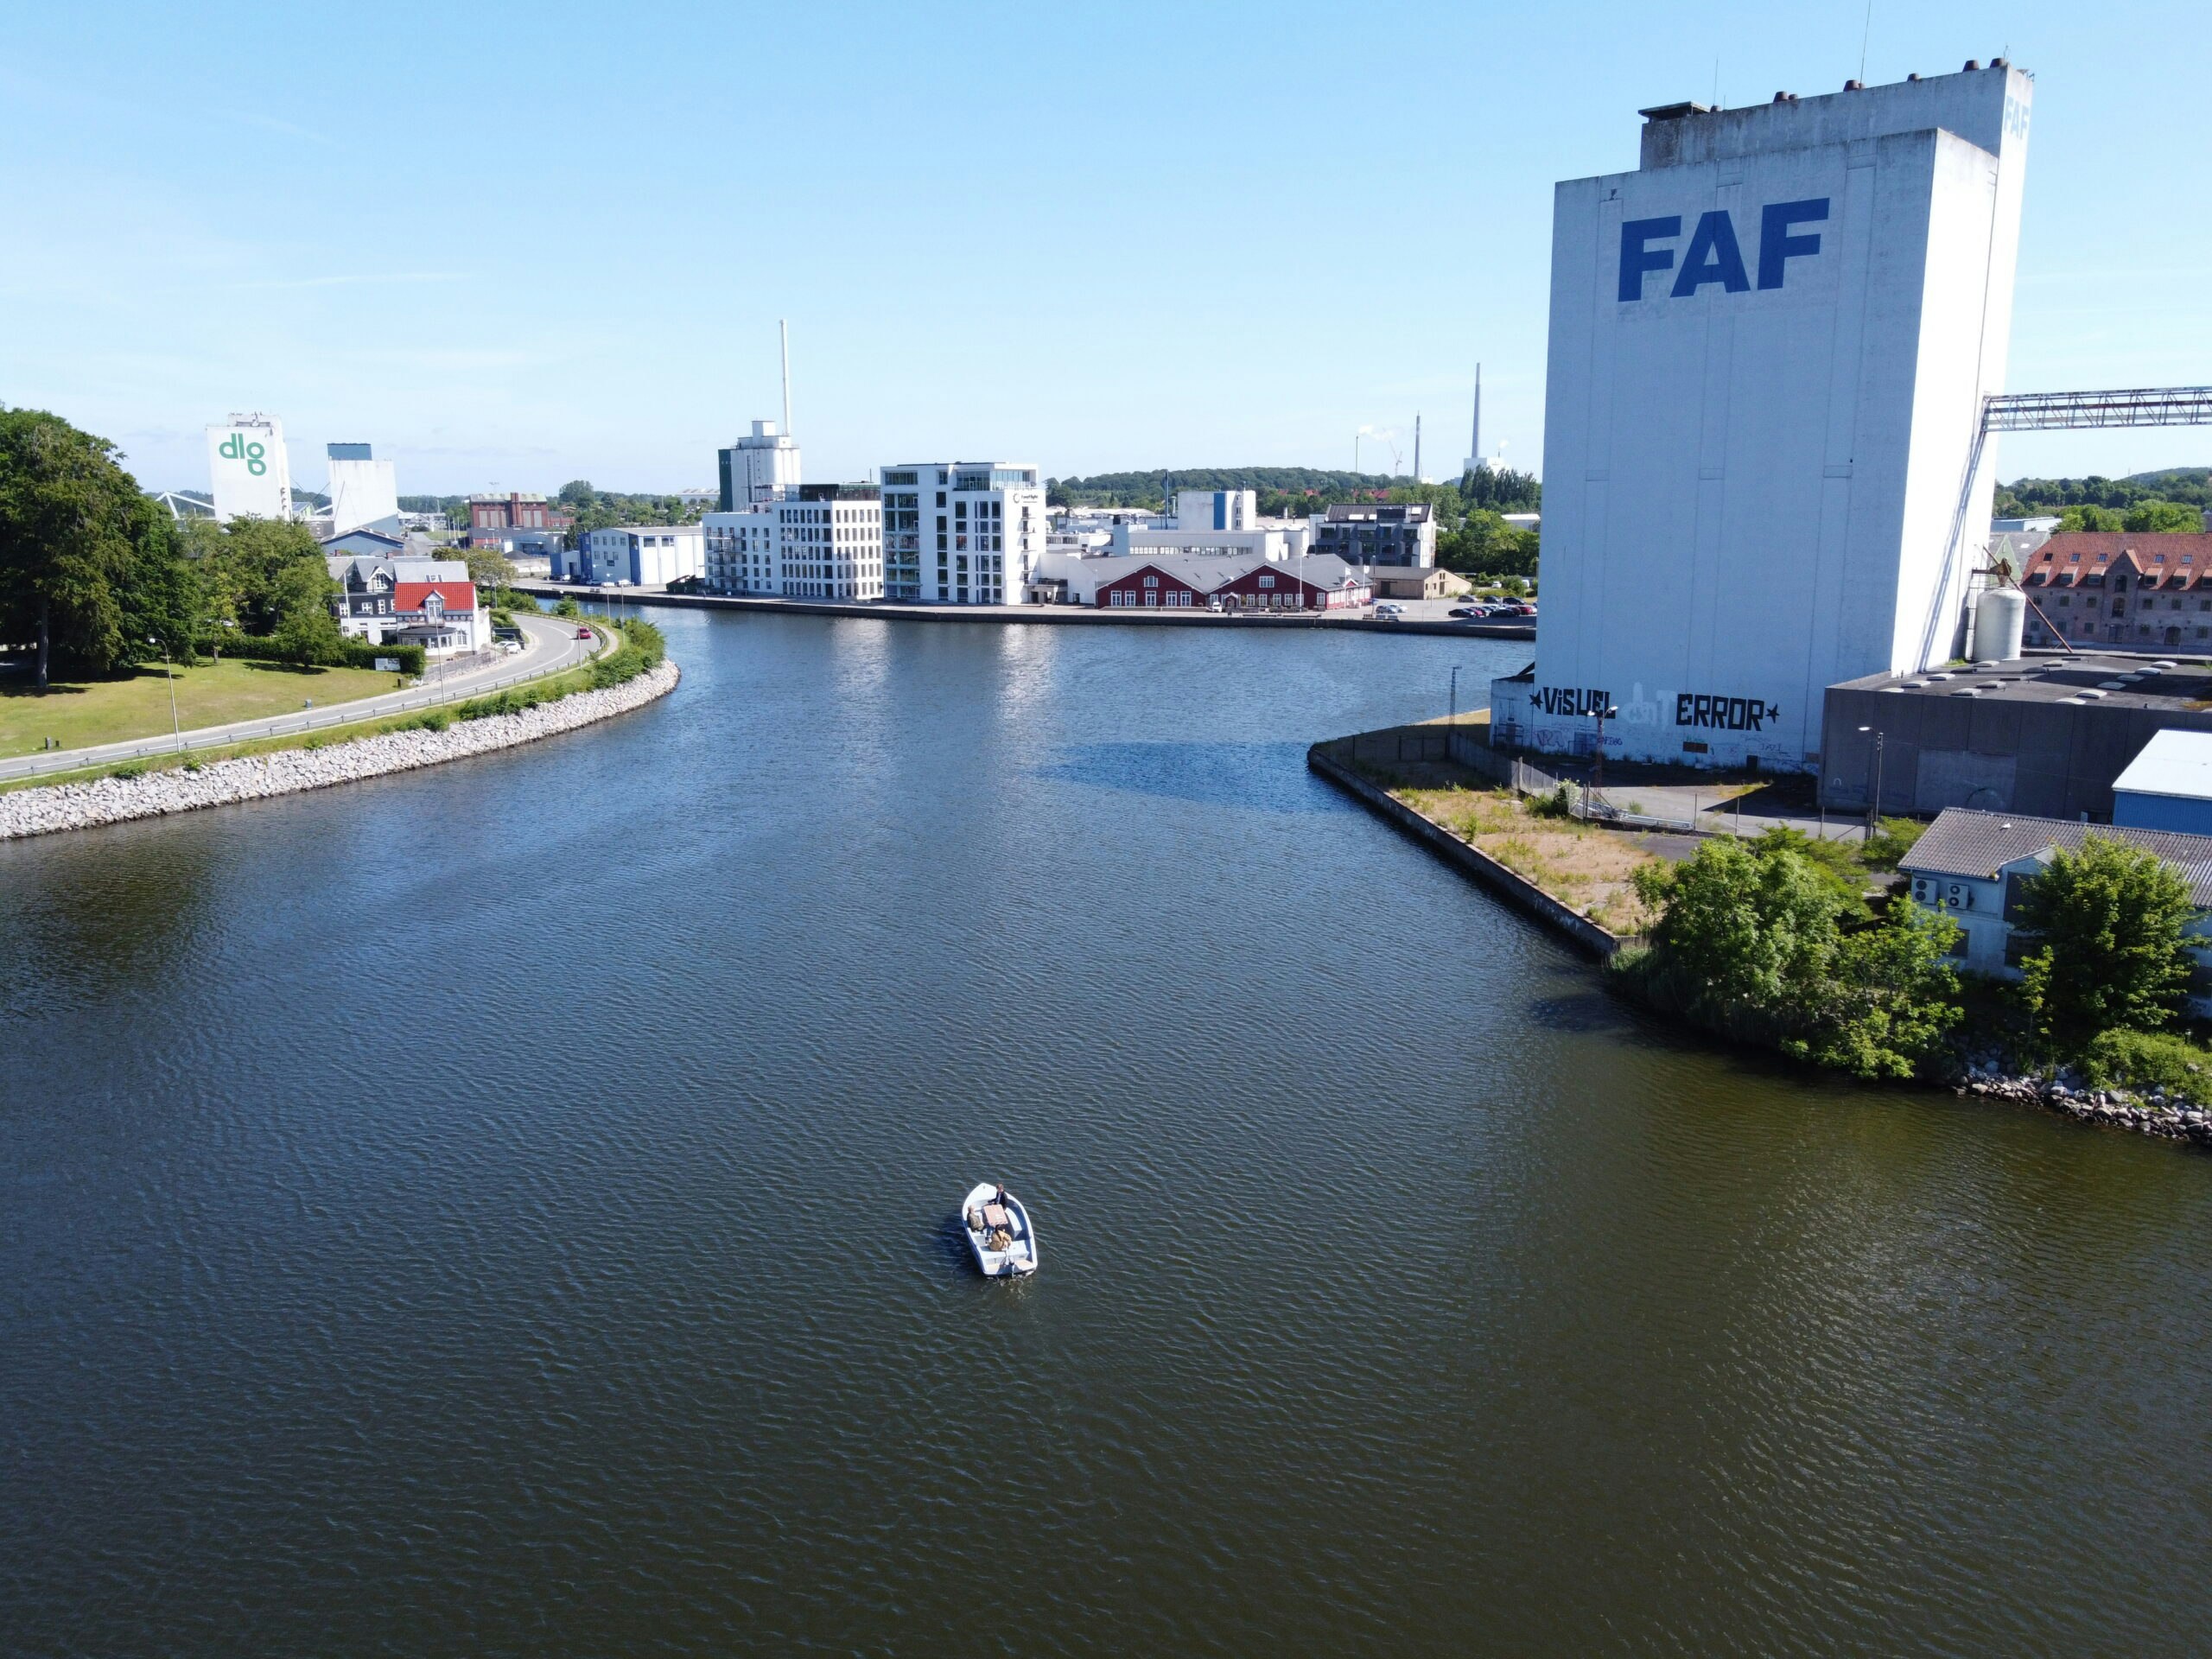 The FAF Building in Odense with a GoBoat